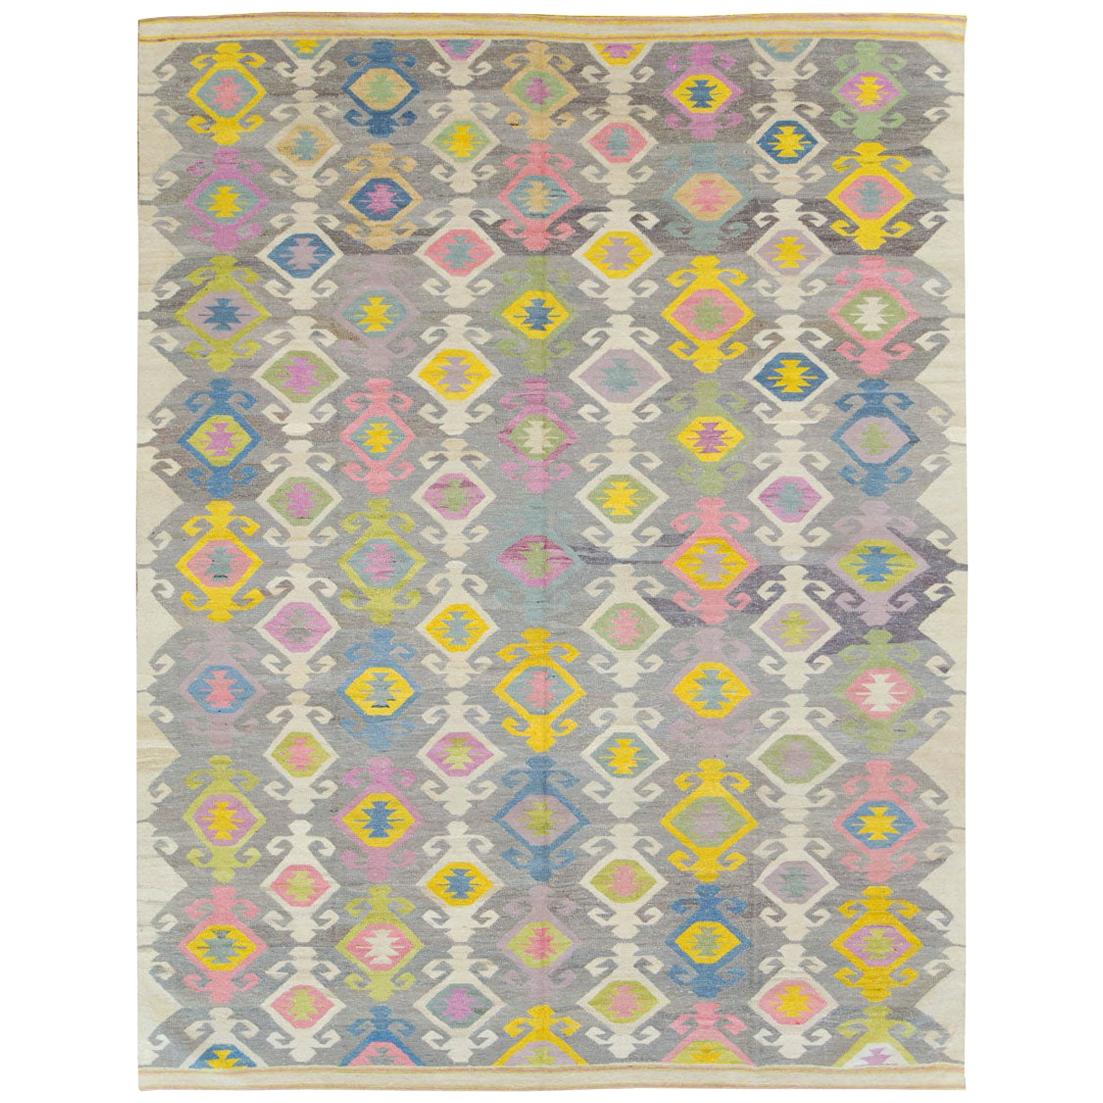 Contemporary Handmade Flat-Weave Rug in Grey Beige Yellow Pink Blue Green For Sale